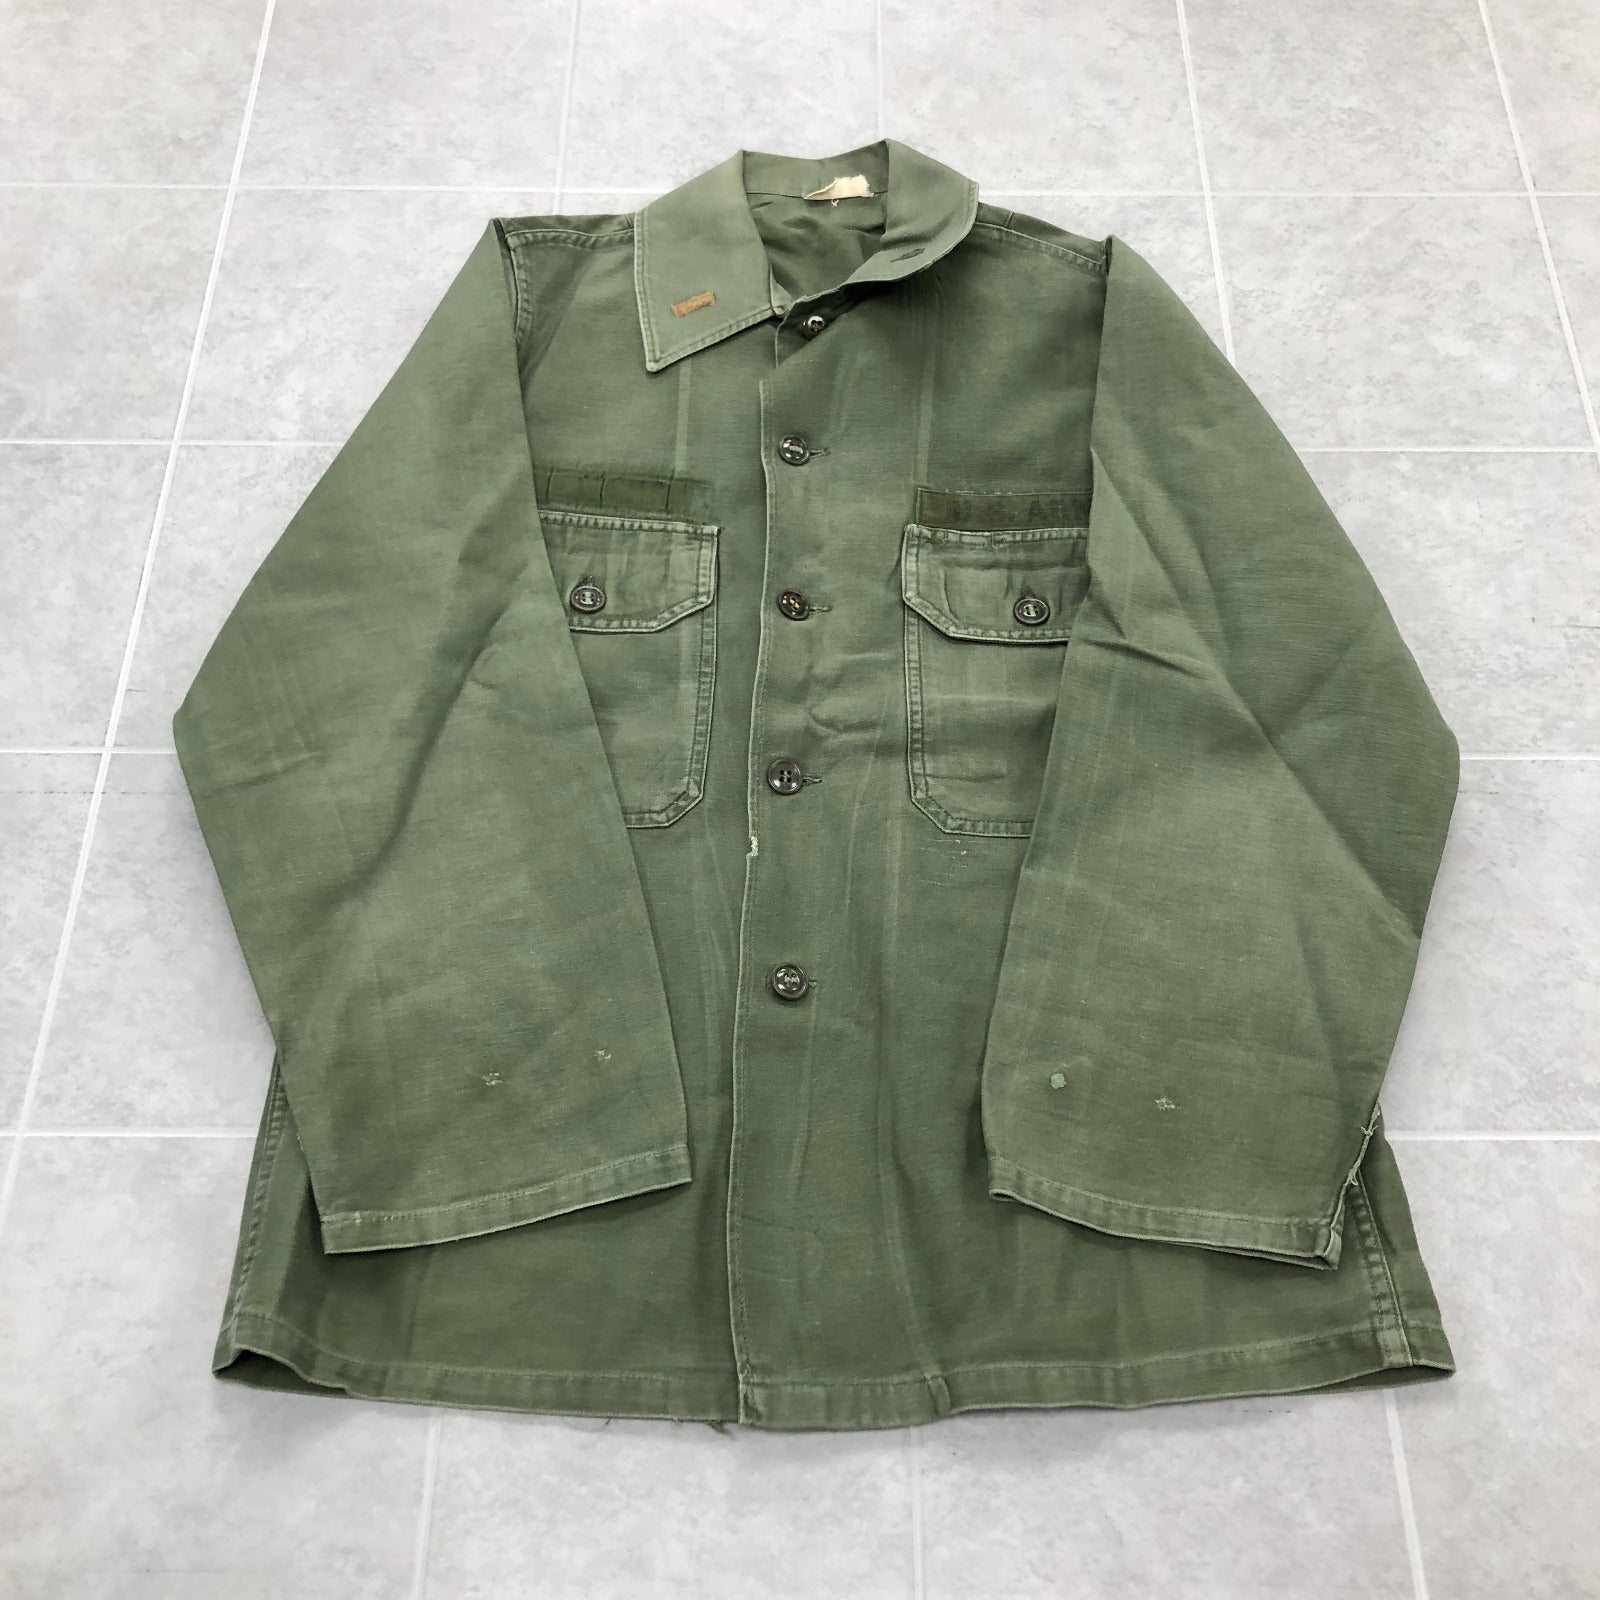 Vintage US Military Green Long Sleeve Button Up Cotton Shirt Adult Size M